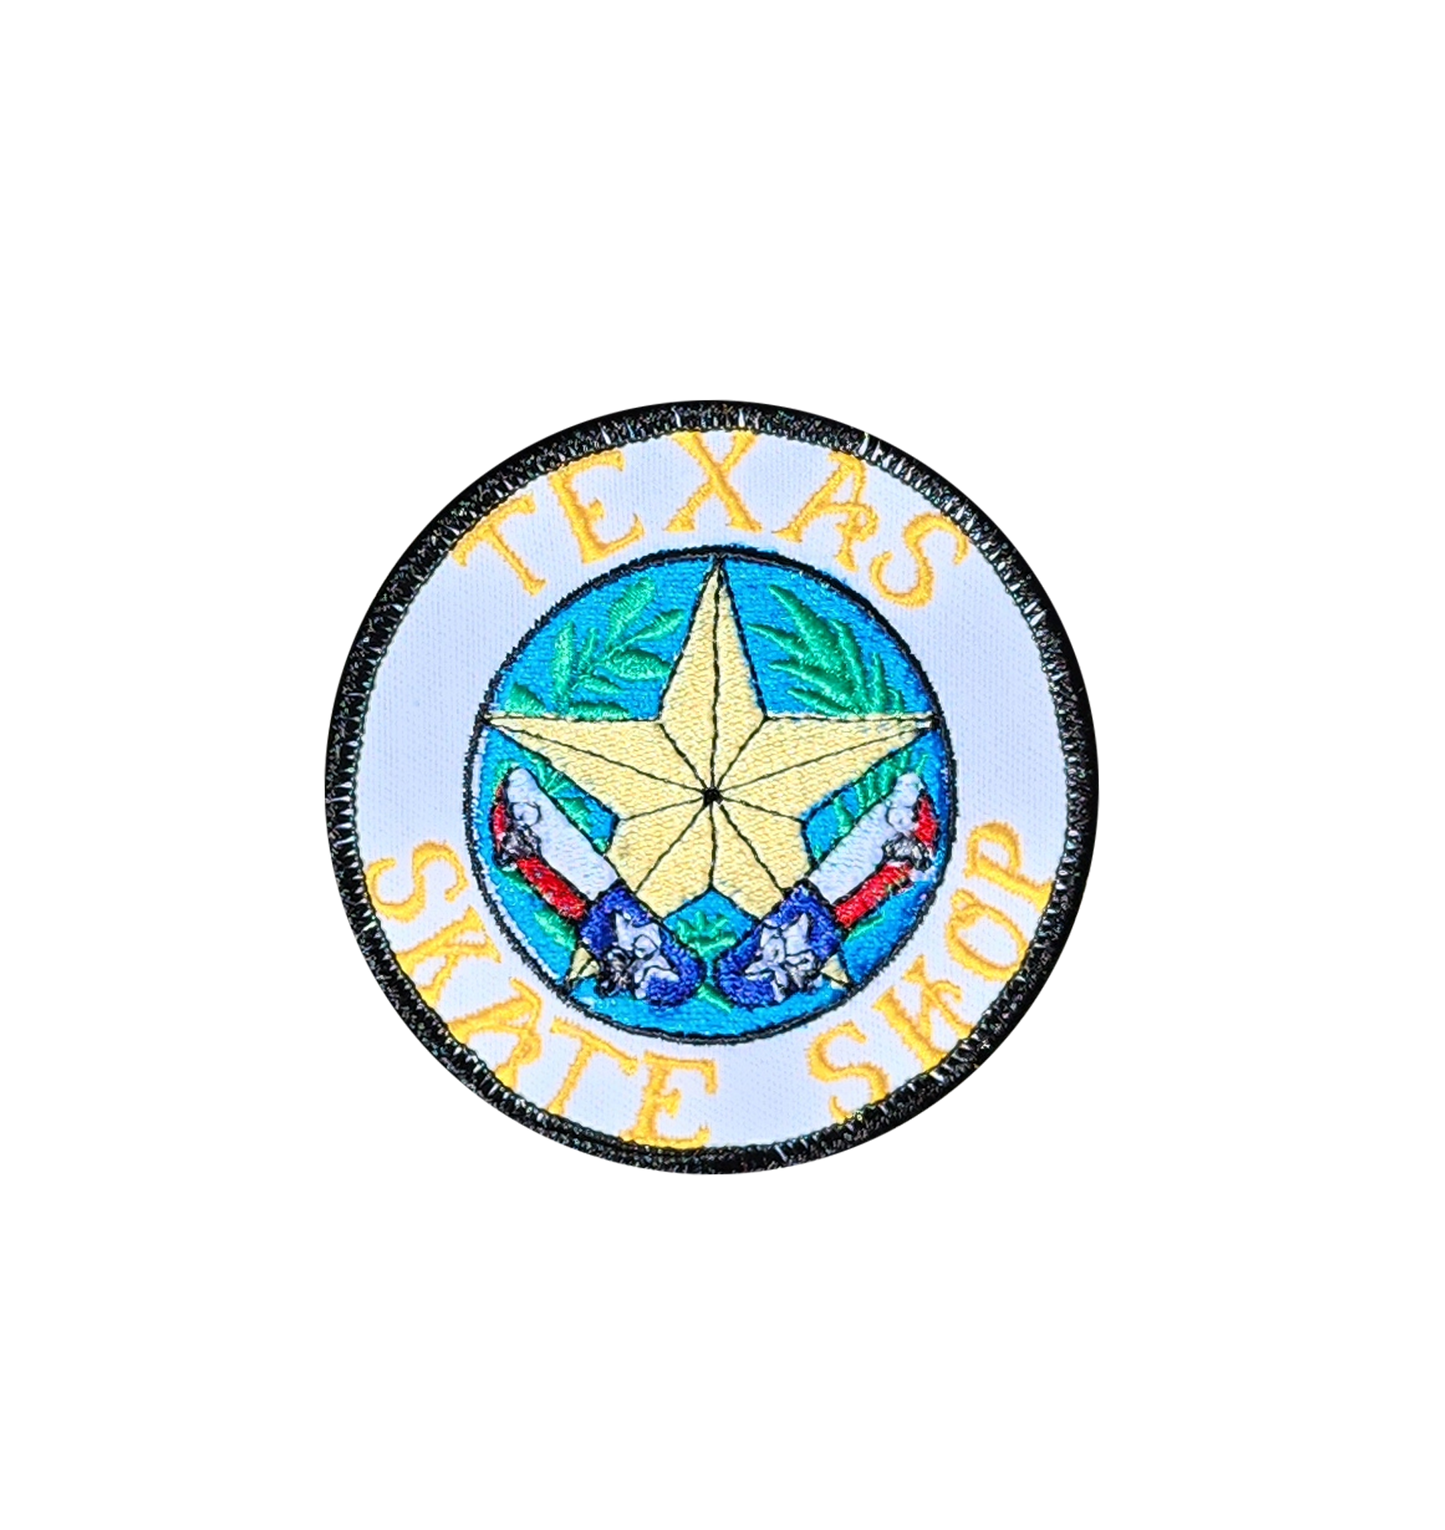 Texas Skate Shop Patch - 3 inch